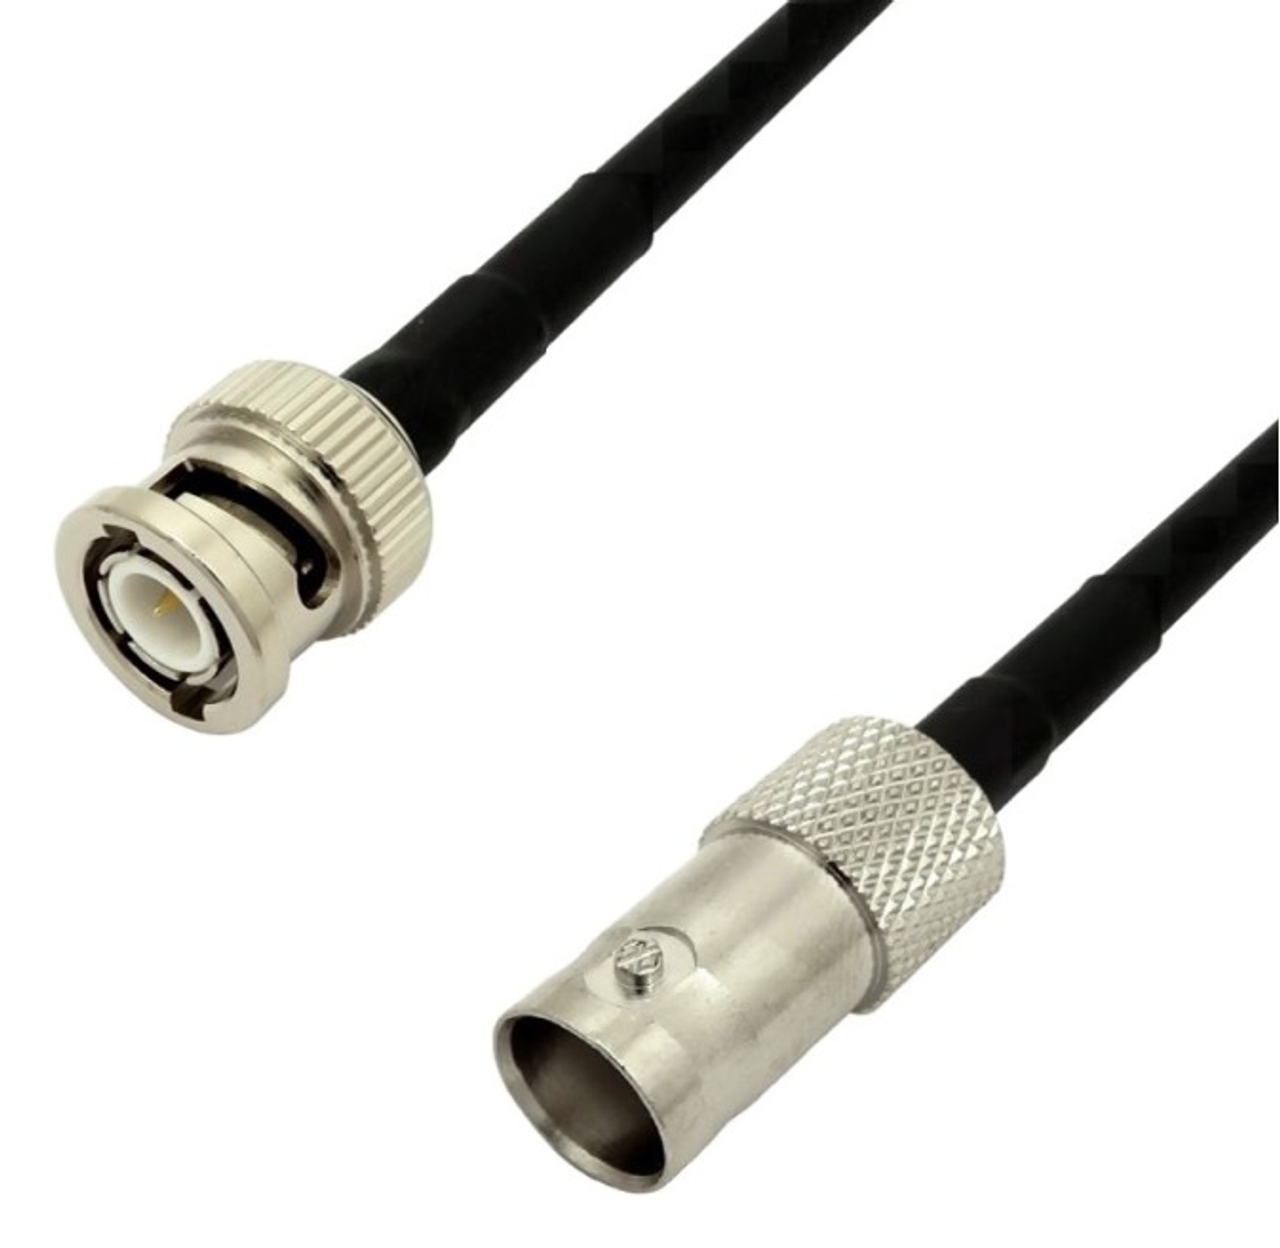 BNC-Male to BNC-Female Coaxial Cable RG-58 - 72-Inch